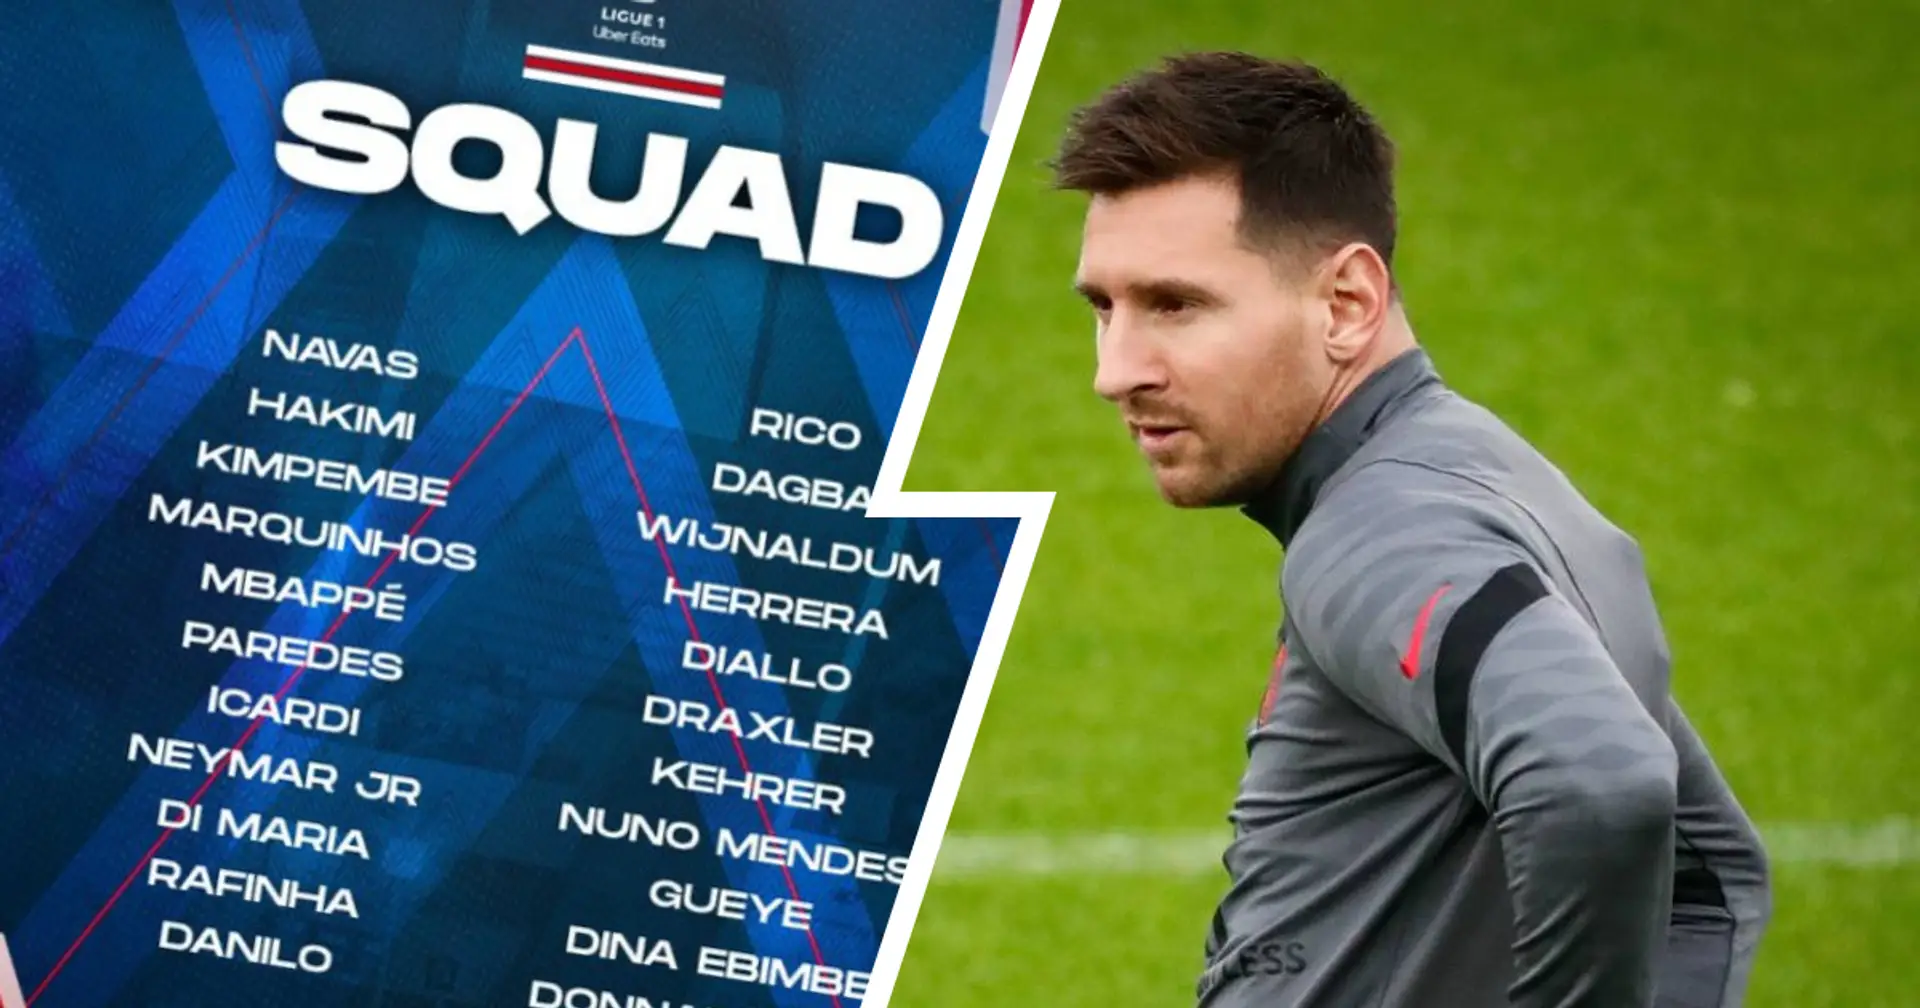 Messi missing again: PSG reveal 22-man squad for Montpellier clash